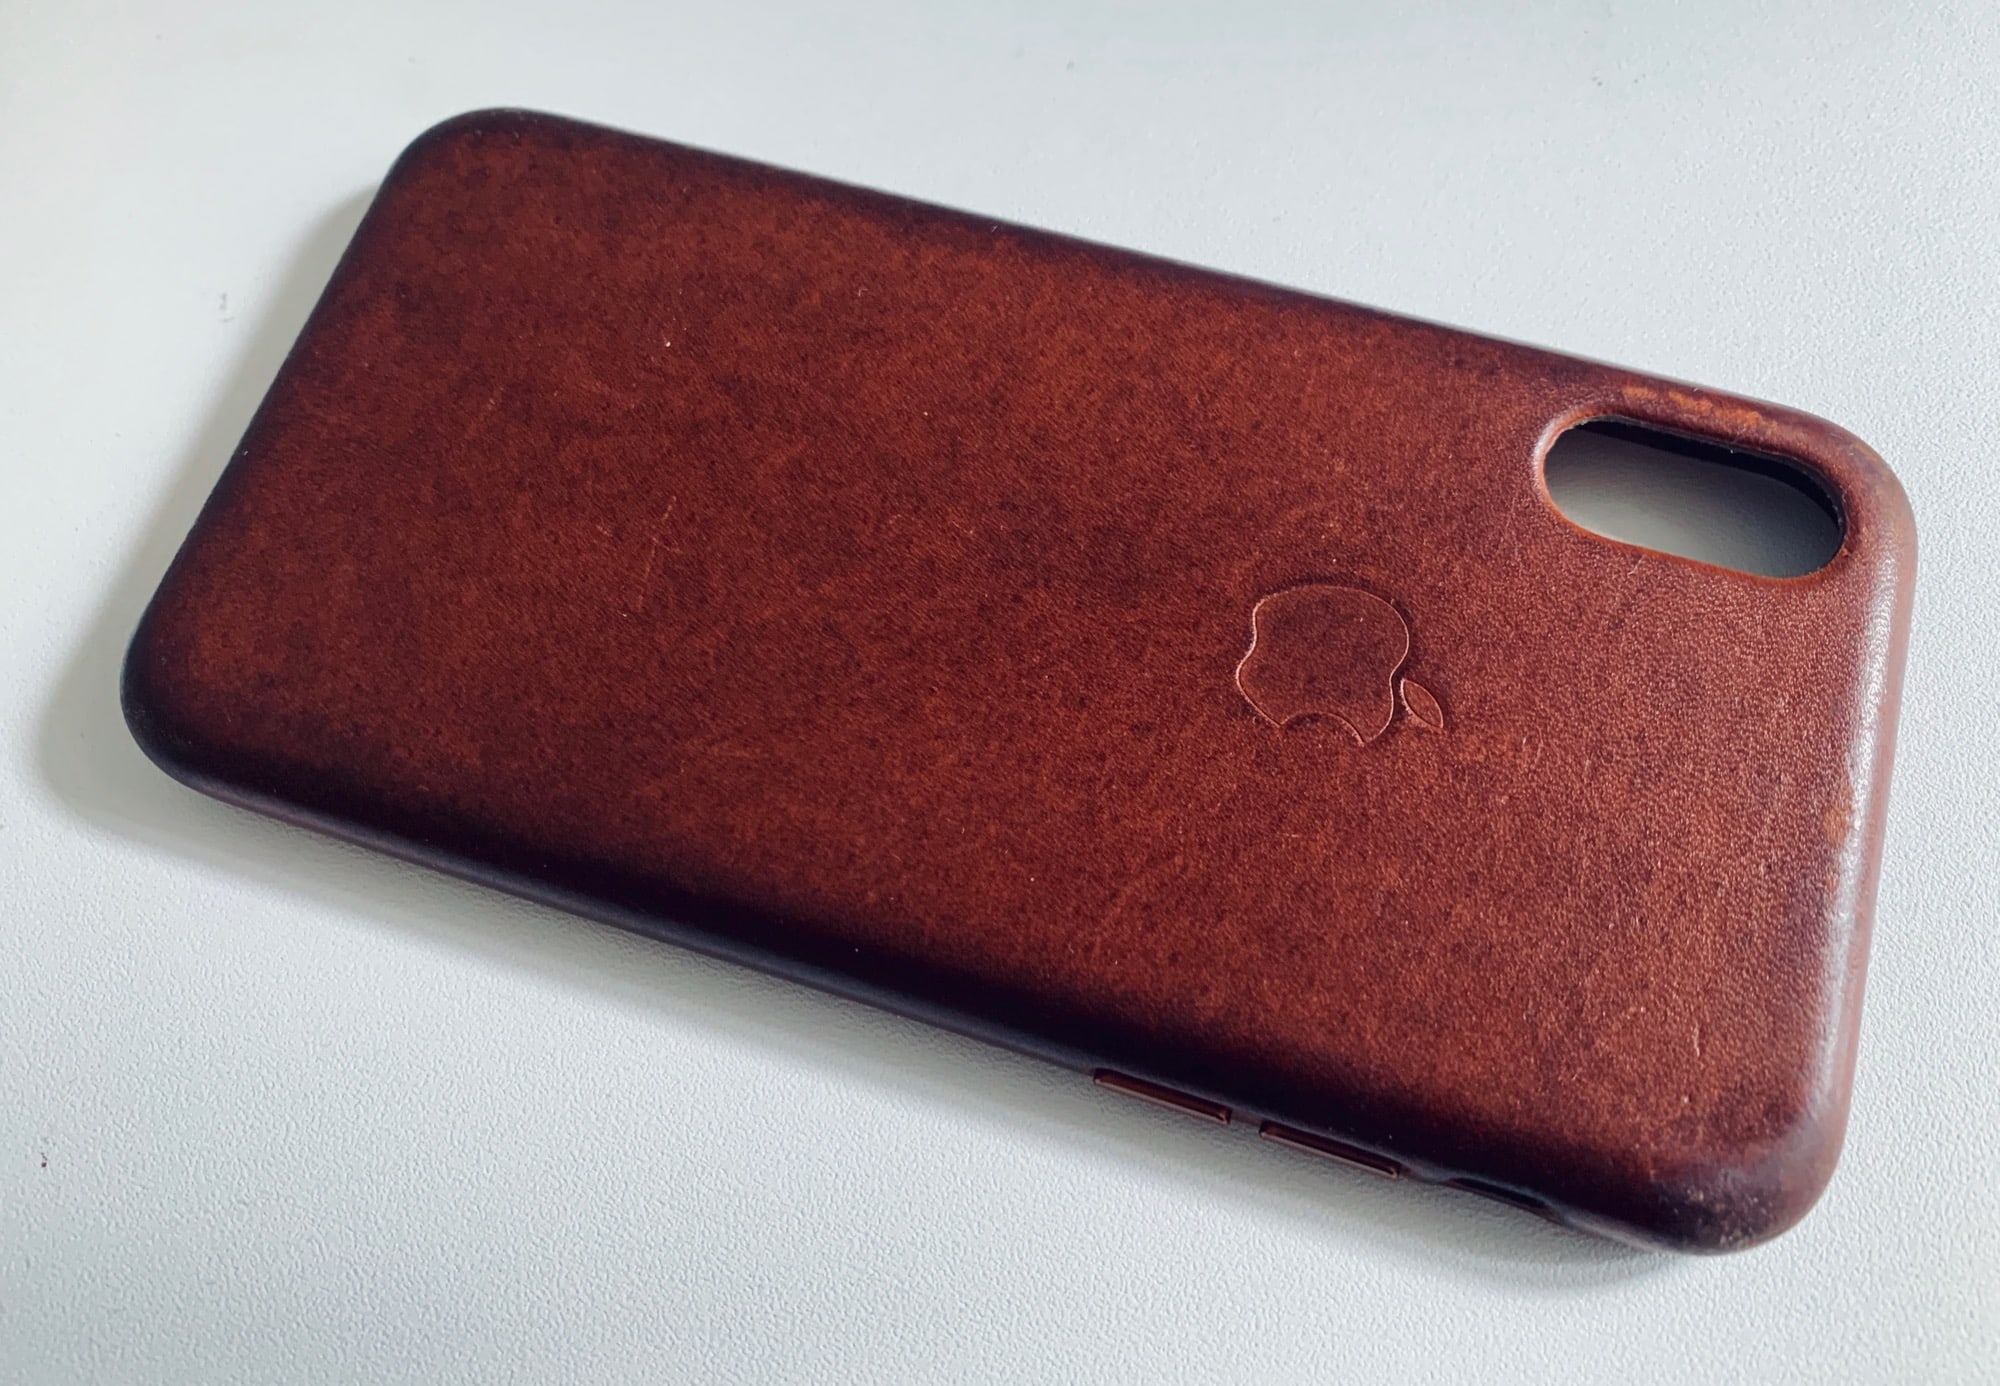 The brown and black leather cases are the only ones that get better with use.